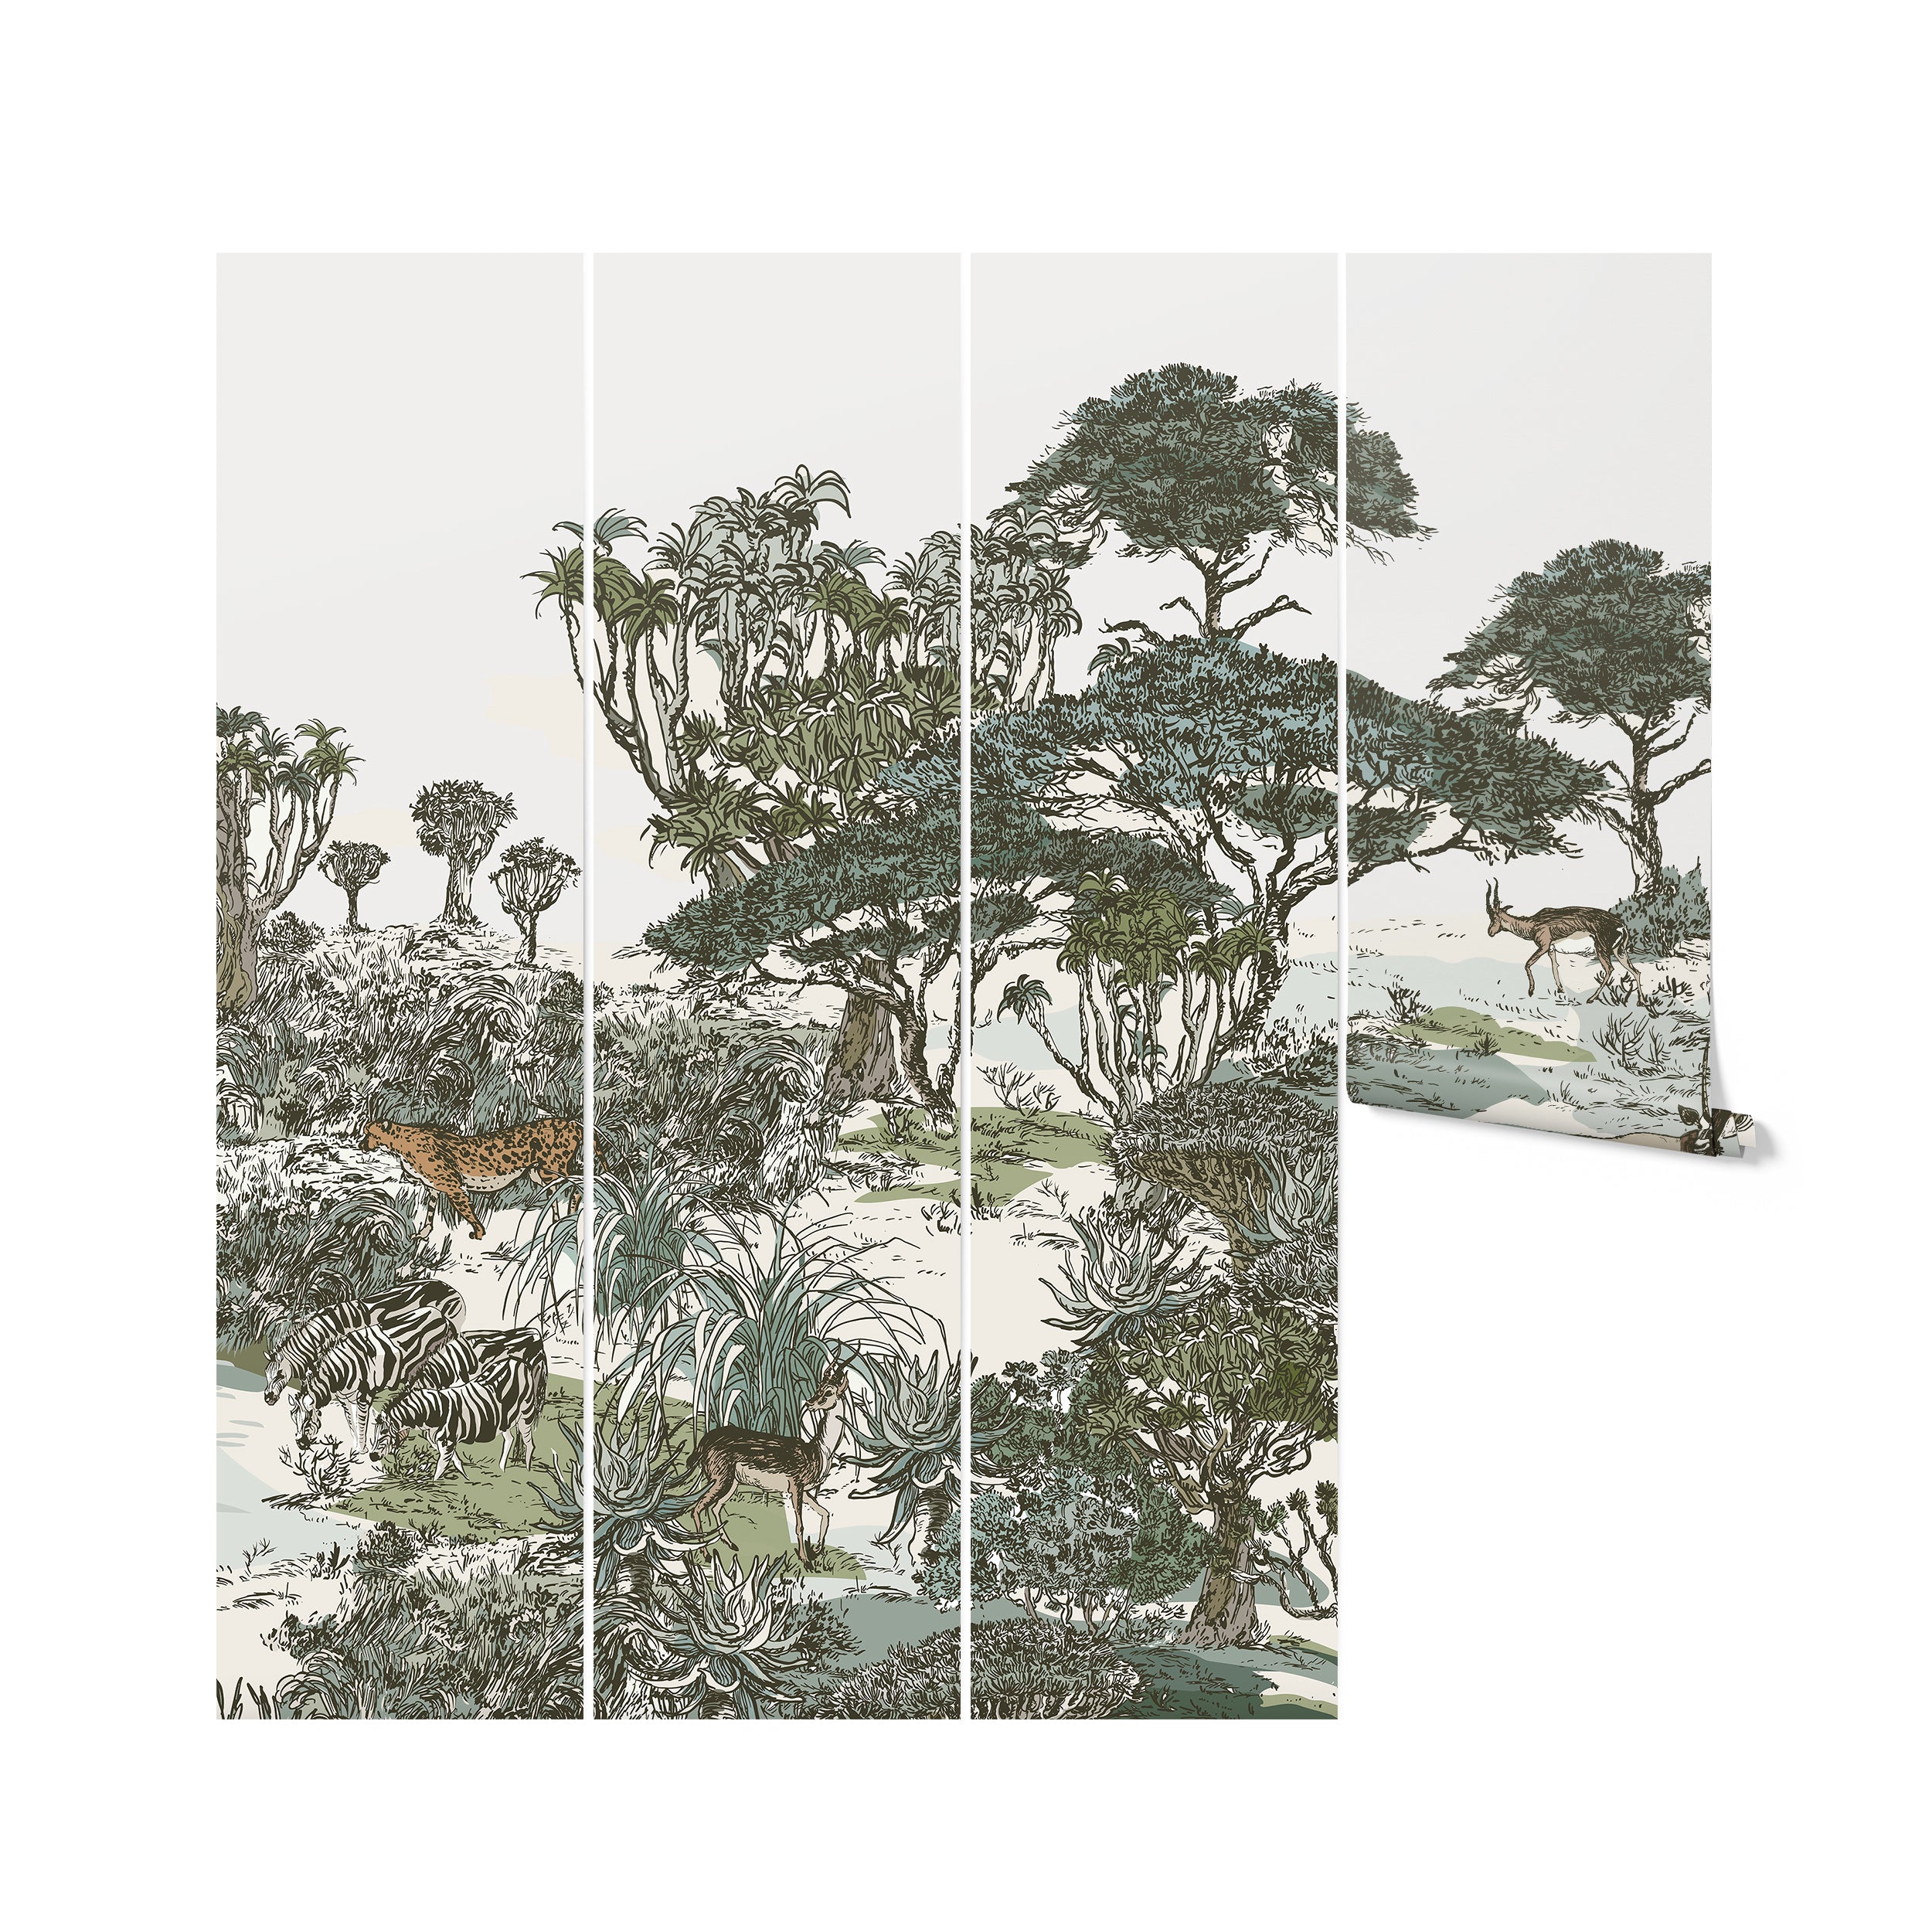 An up-close view of a safari wallpaper mural with a folded corner revealing the separate panels. The wallpaper depicts a detailed savanna landscape with various trees, a leopard, zebra, and impalas in a continuous pattern